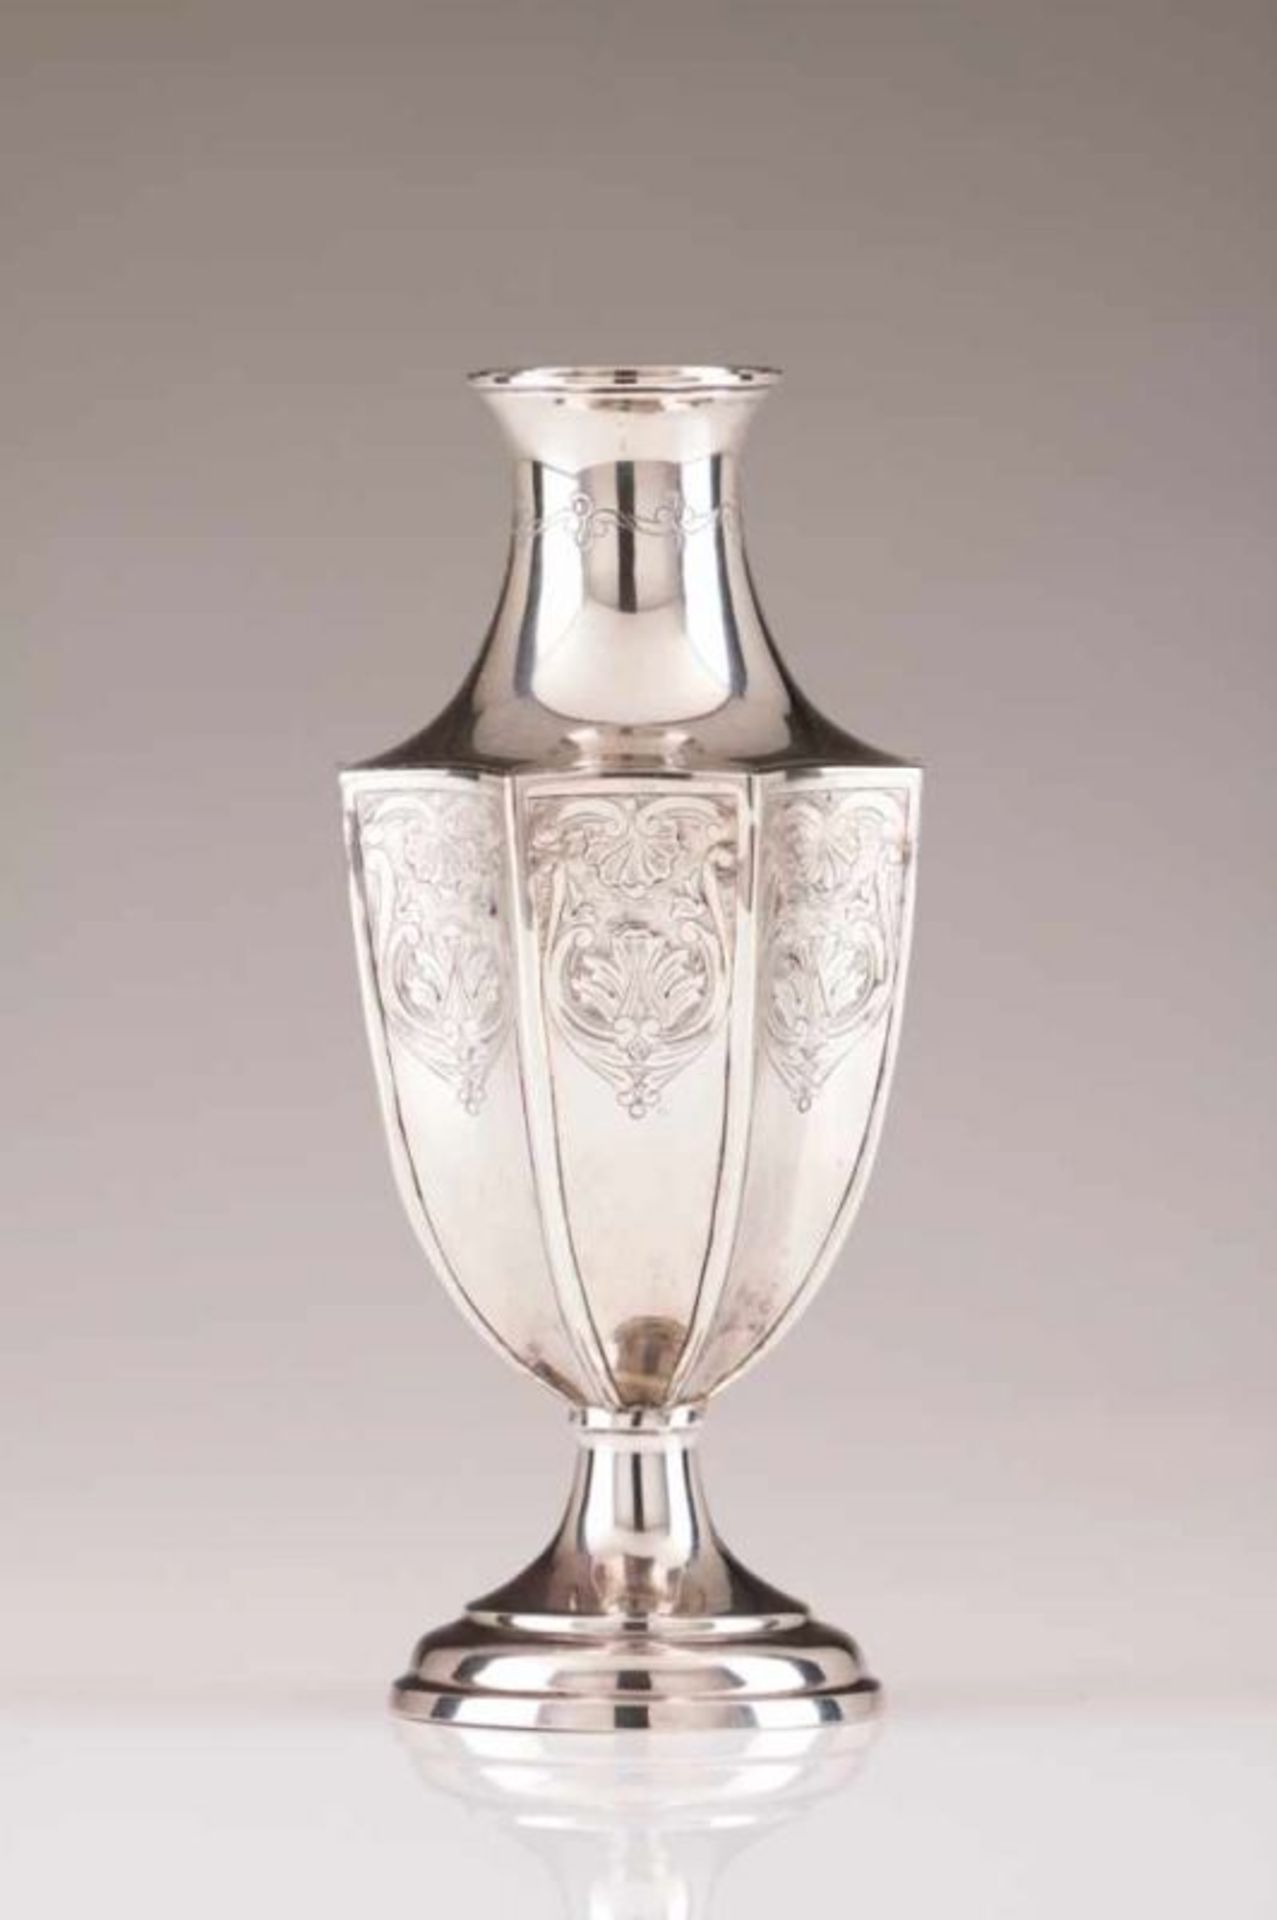 A baluster vase Portuguese silver Of baluster shape with engraved decoration Porto assay mark (